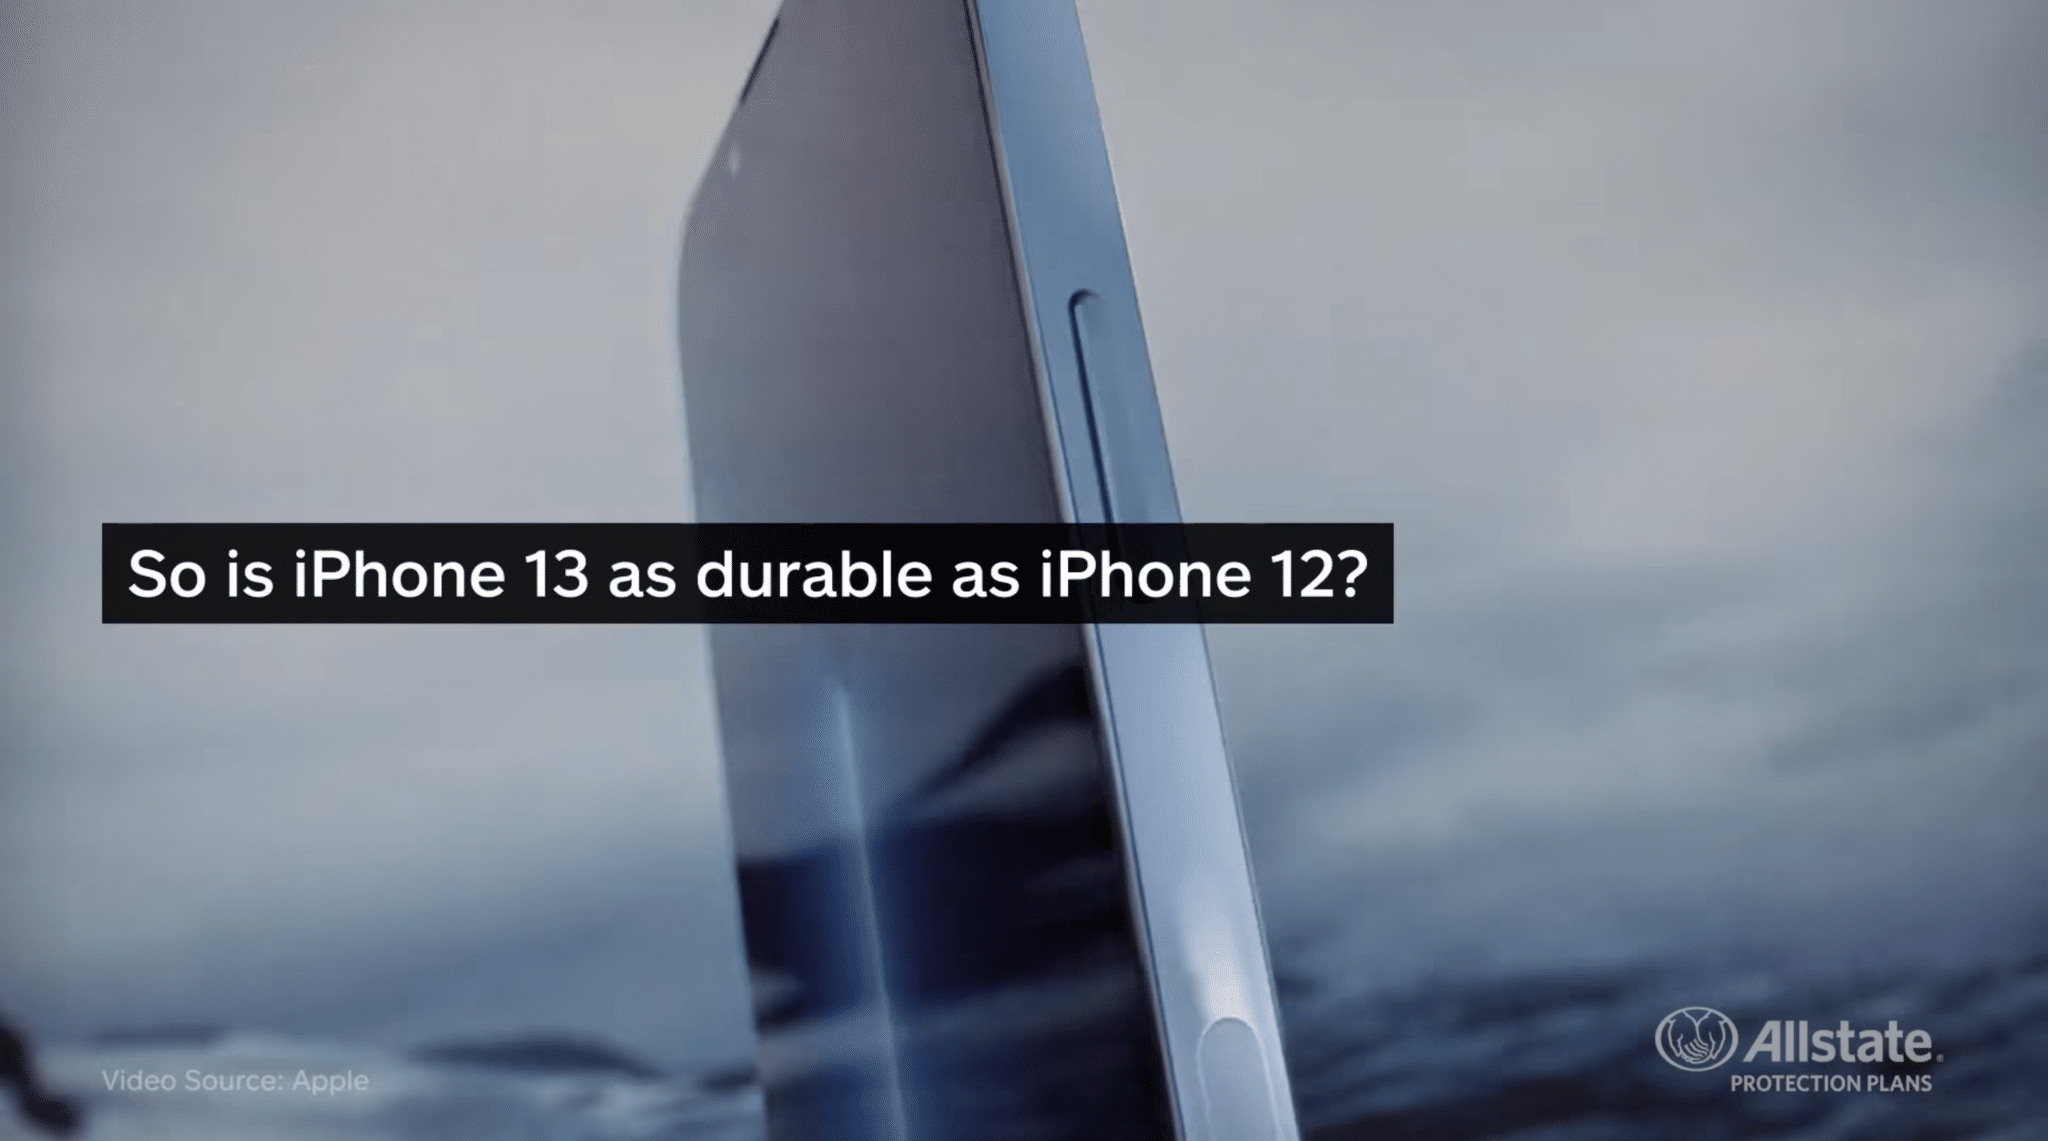 Allstate Protection Plans Tests the New iPhone 13